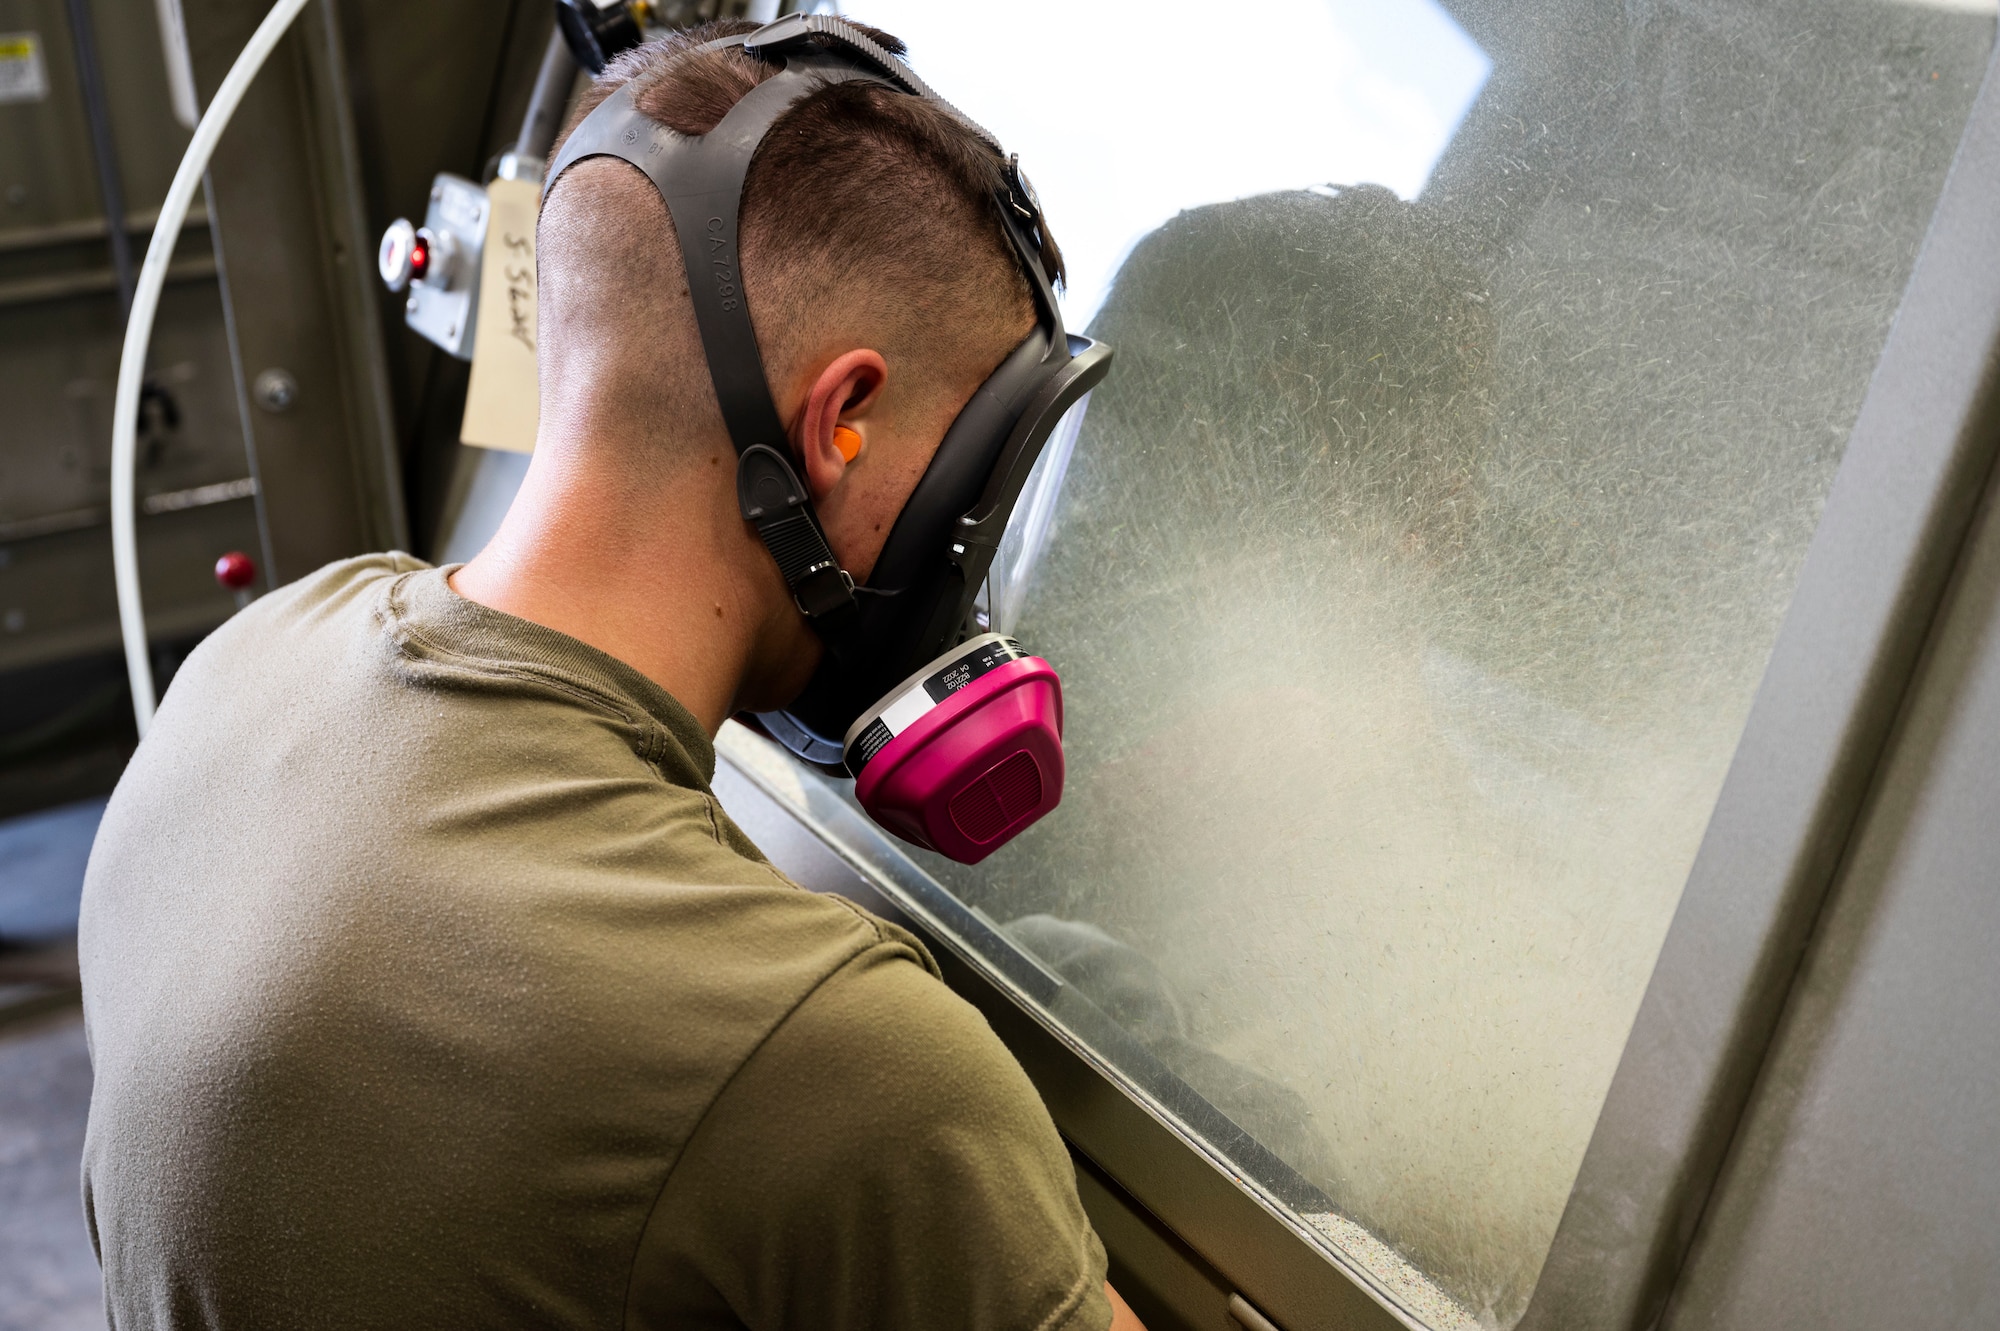 U.S. Air Force Airman Caleb Pridemore, 49th Equipment Maintenance Squadron aircraft structural maintenance apprentice, sandblasts a piece of aircraft metal at Holloman Air Force Base, New Mexico, Oct. 2, 2023. The corrosion shop is primarily responsible for ensuring that the structural parts of Holloman’s F-16 Vipers are properly painted, sanded and free of any corrosive damage. (U.S. Air Force photo by Airman 1st Class Isaiah Pedrazzini)